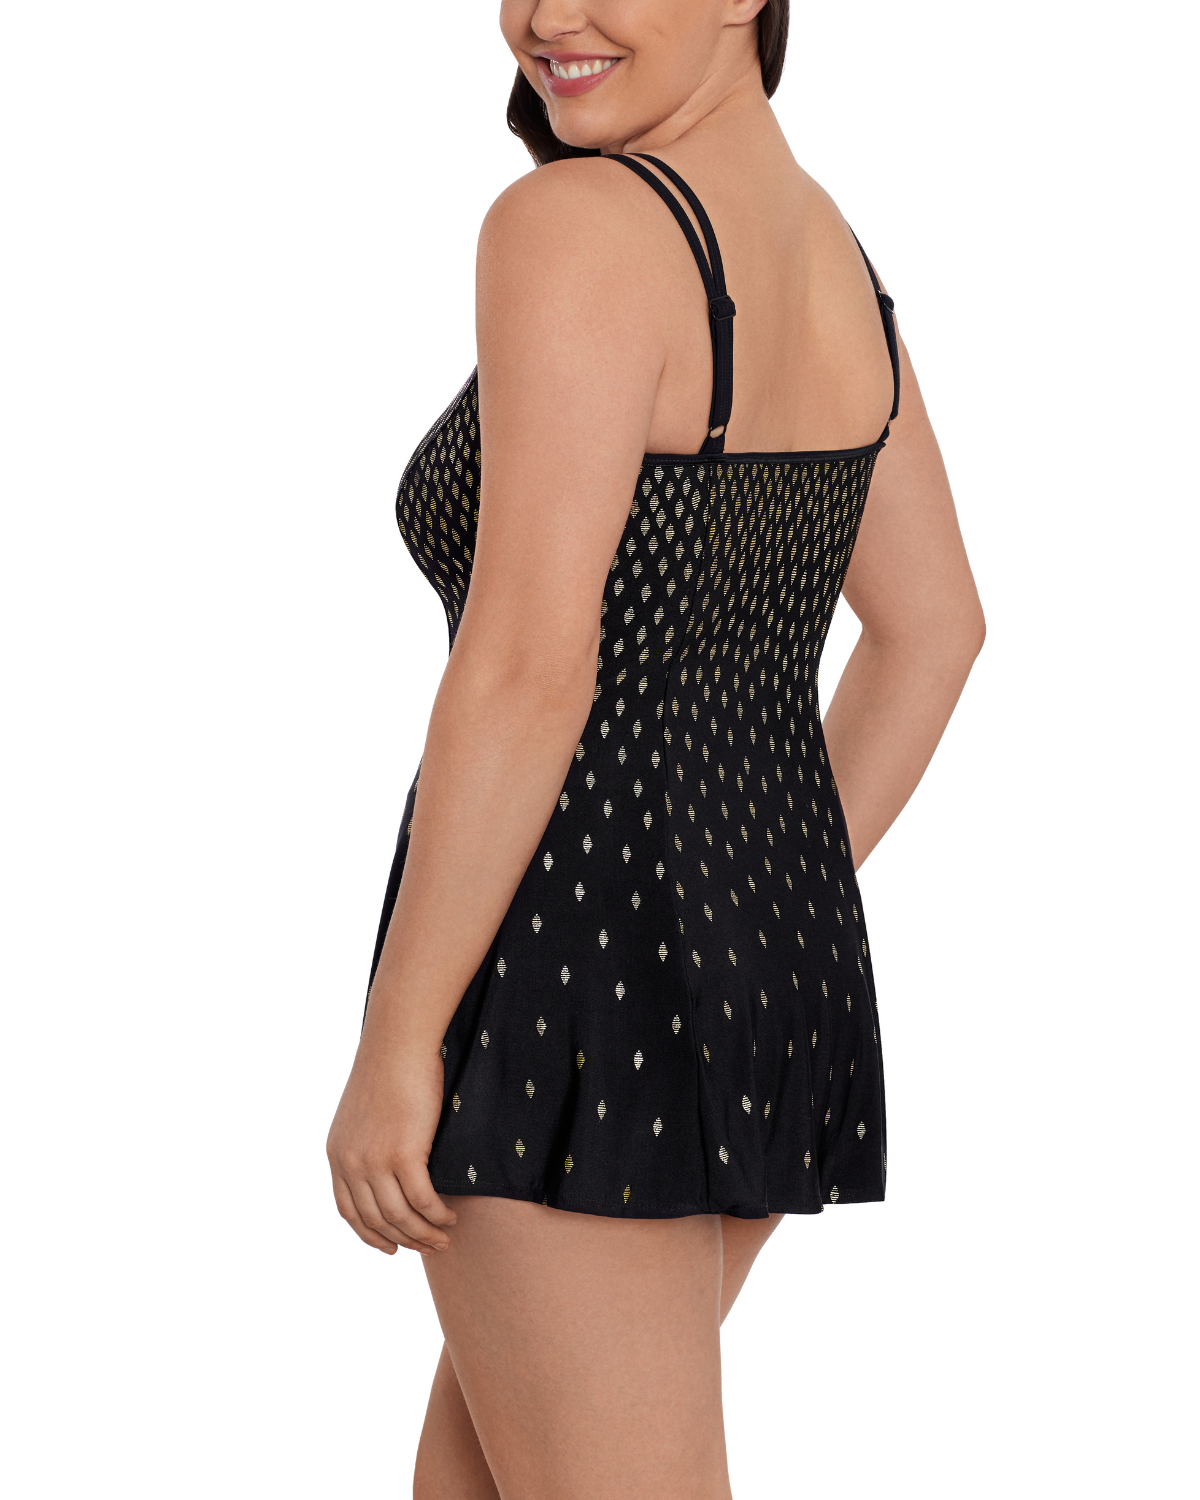 Model wearing an empire swimdress in black with gold dots 